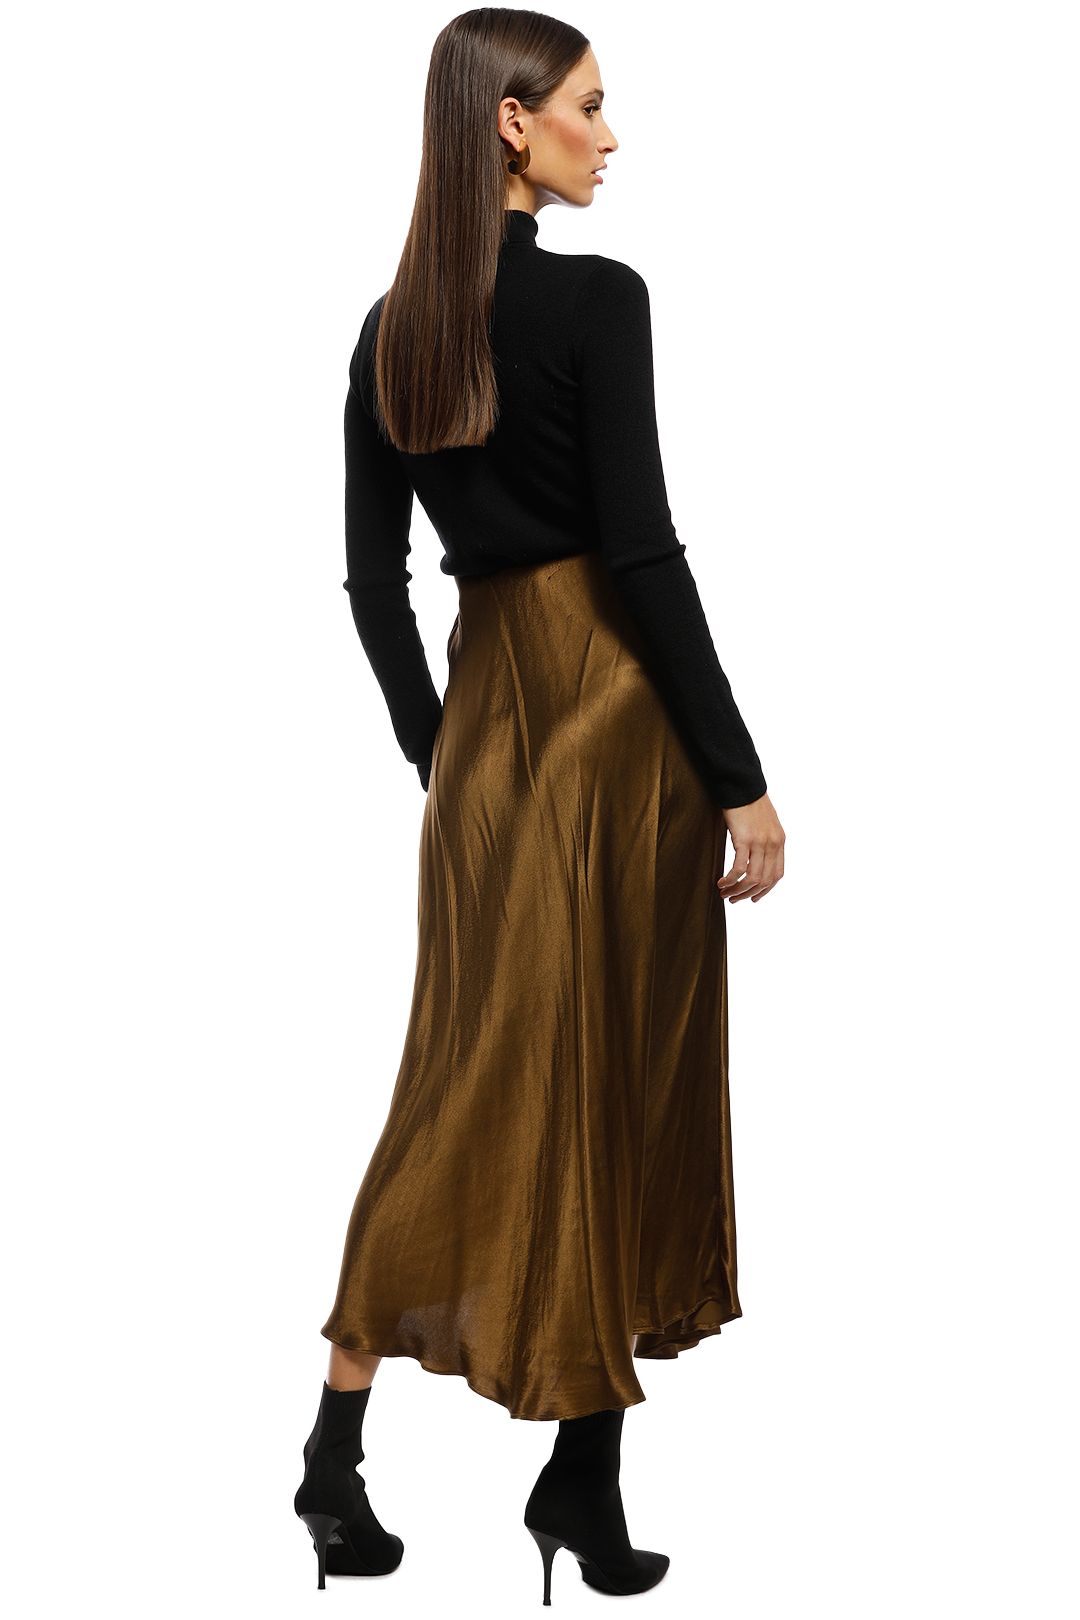 AKIN by Ginger & Smart - Grove Skirt - Brown - Back